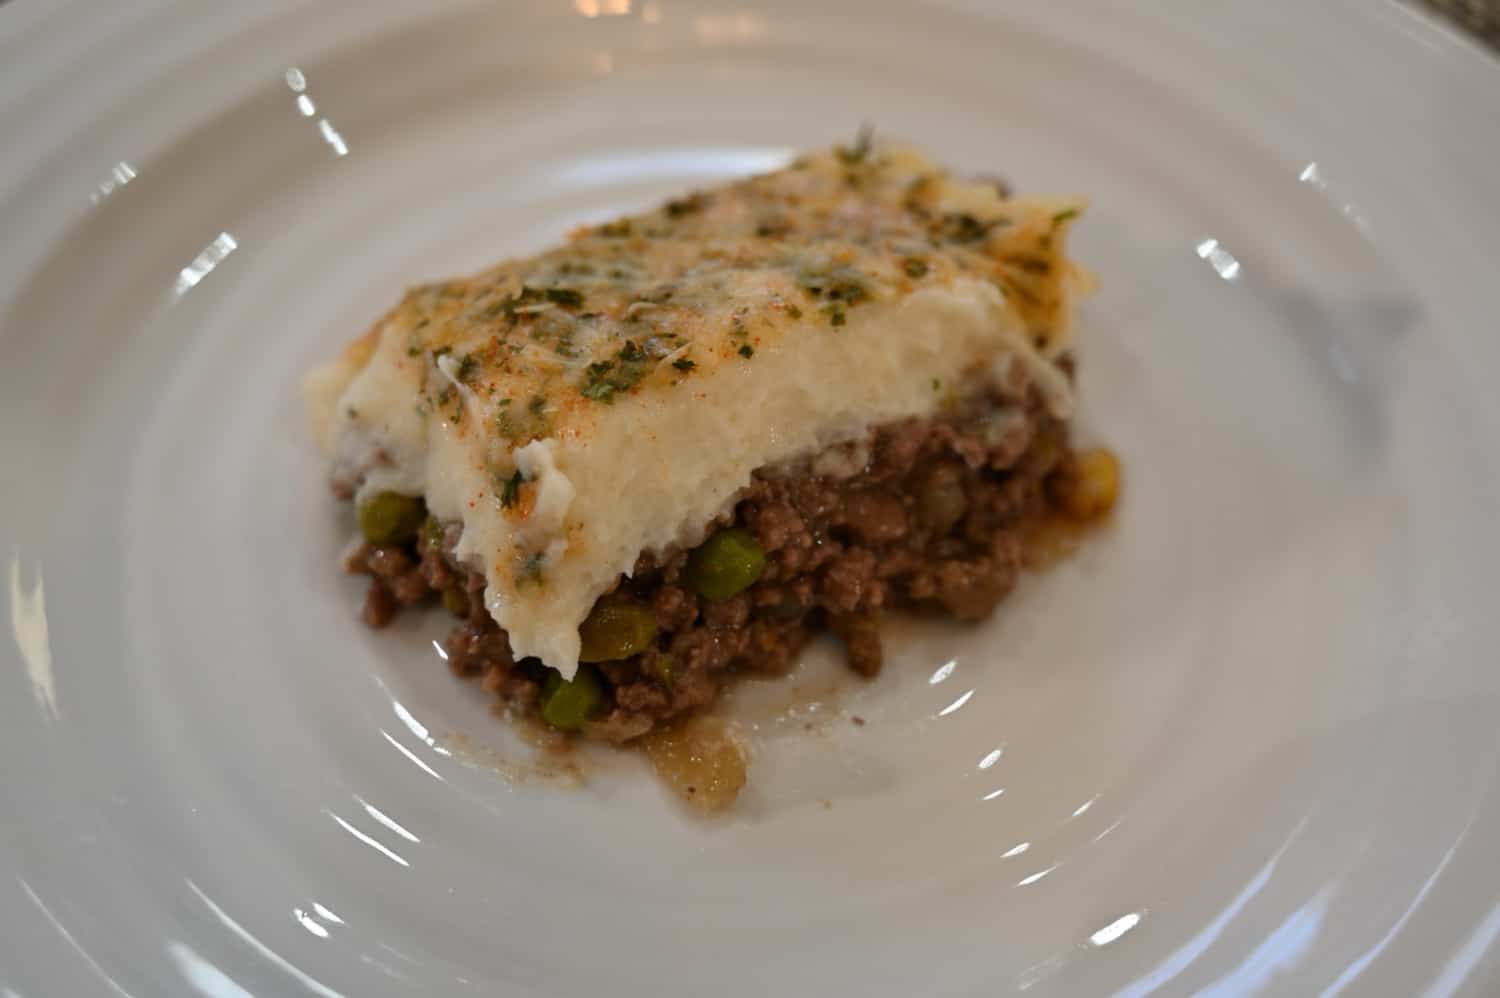 Close-up of a piece of the shepherd's pie.